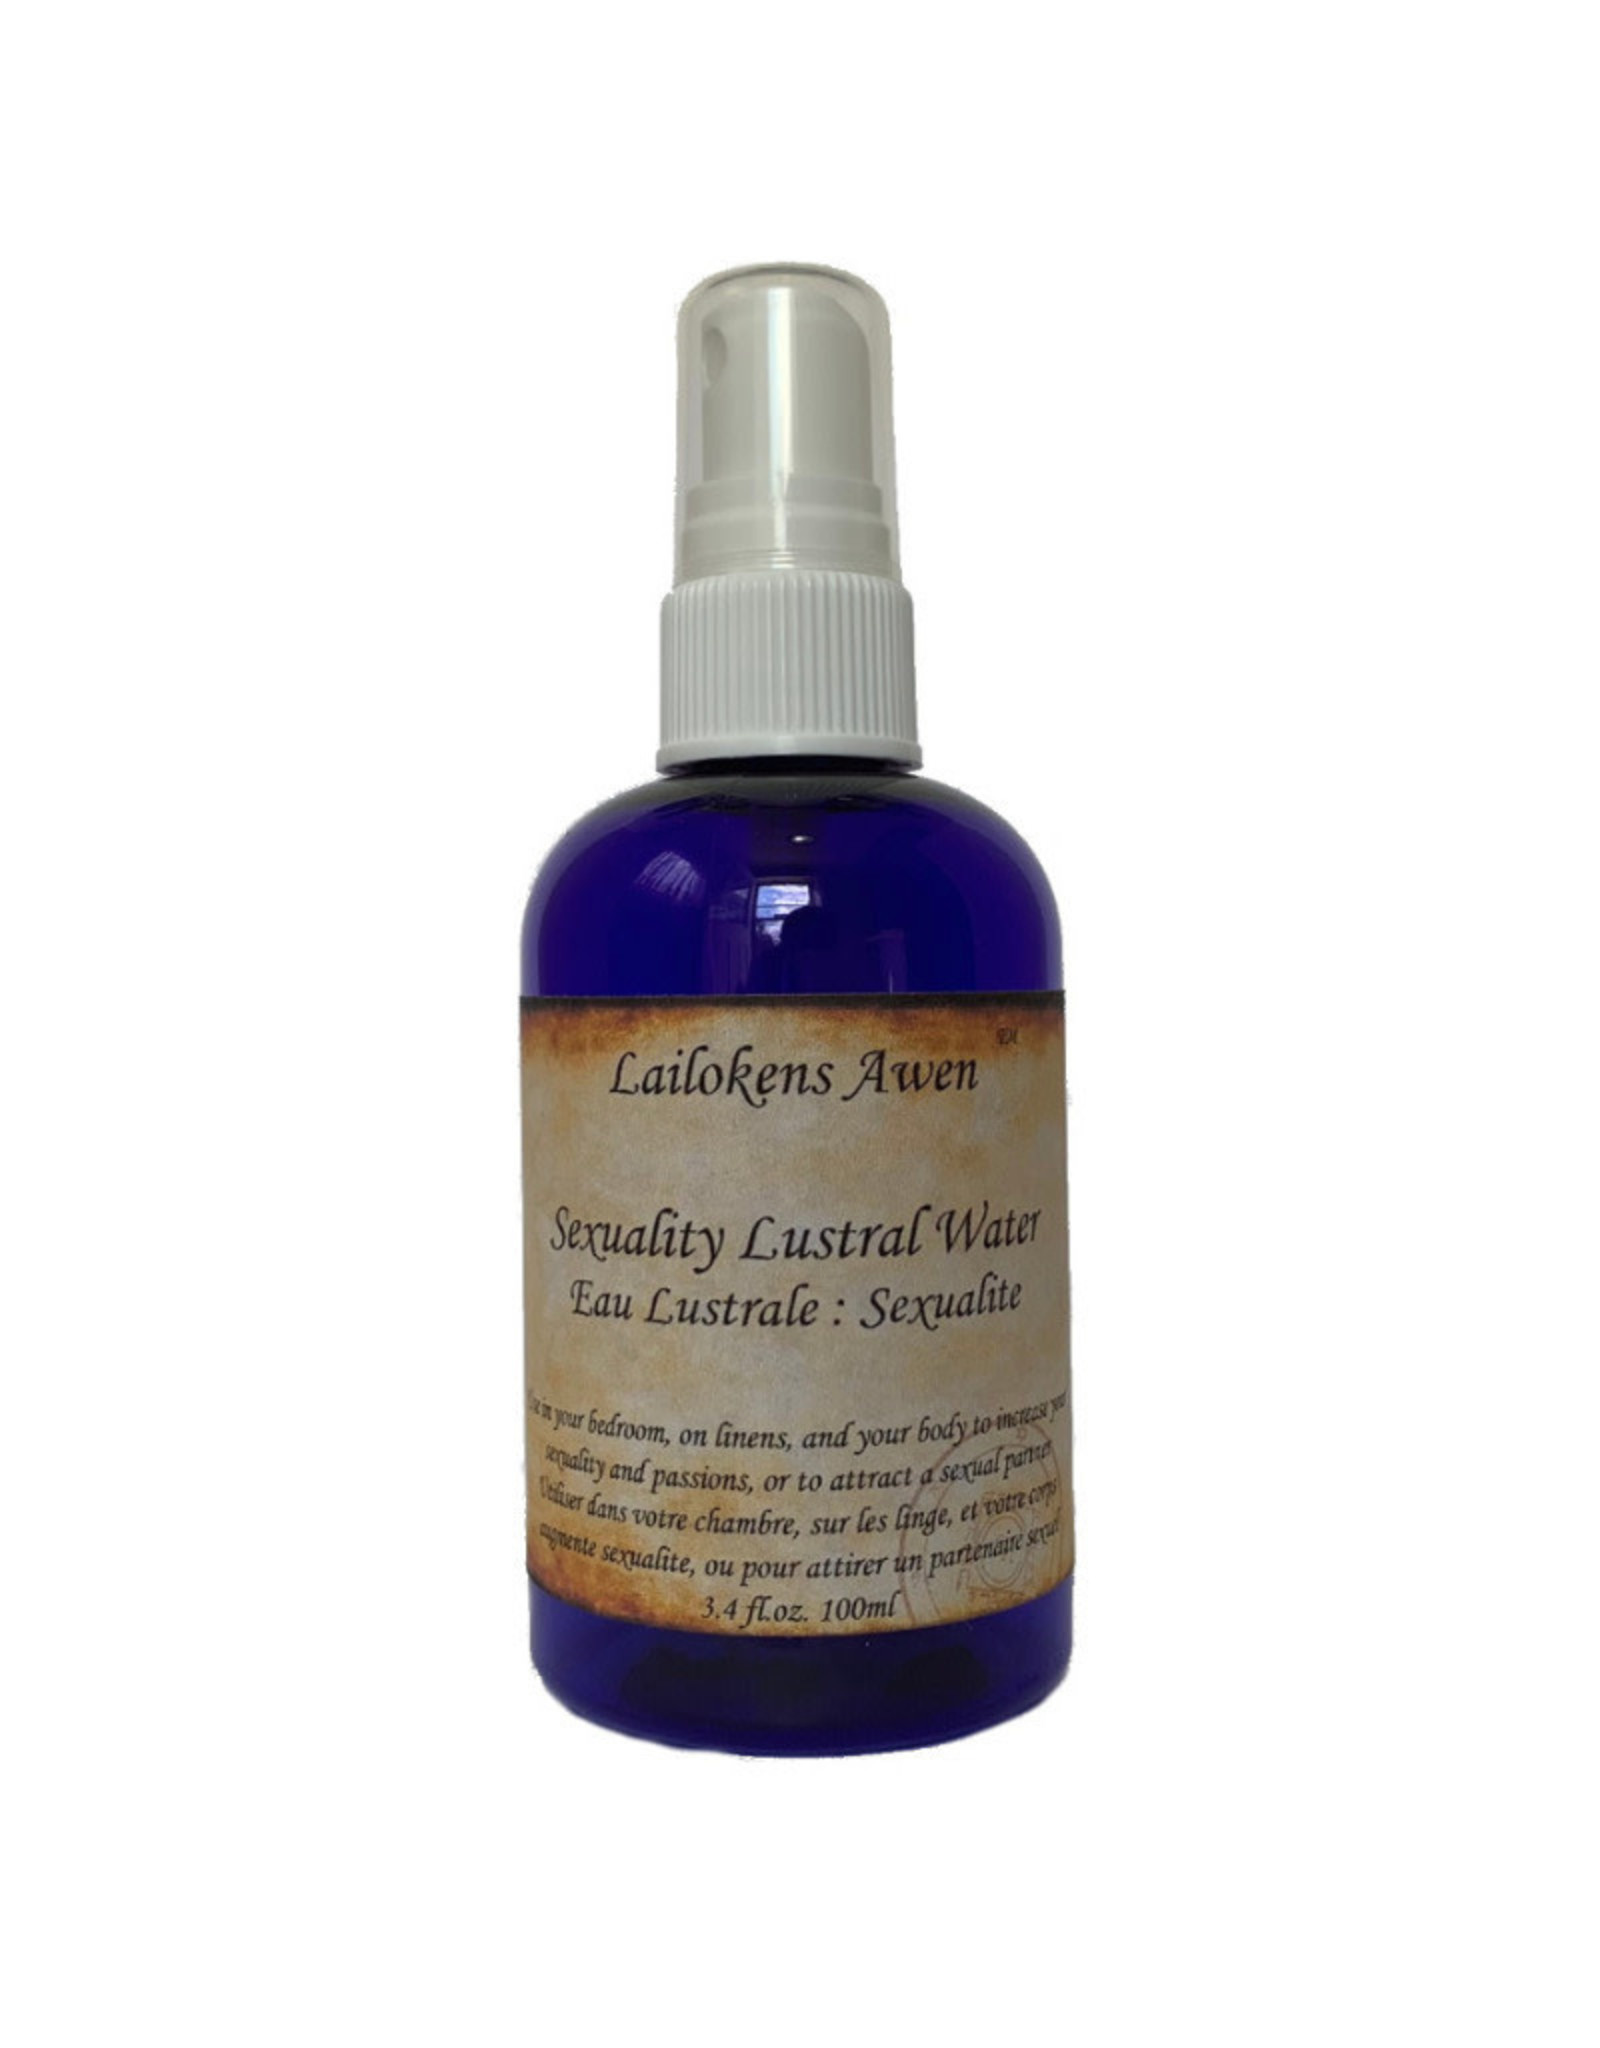 Lailokens Awen Sexuality Lustral Water Spray - 100ml